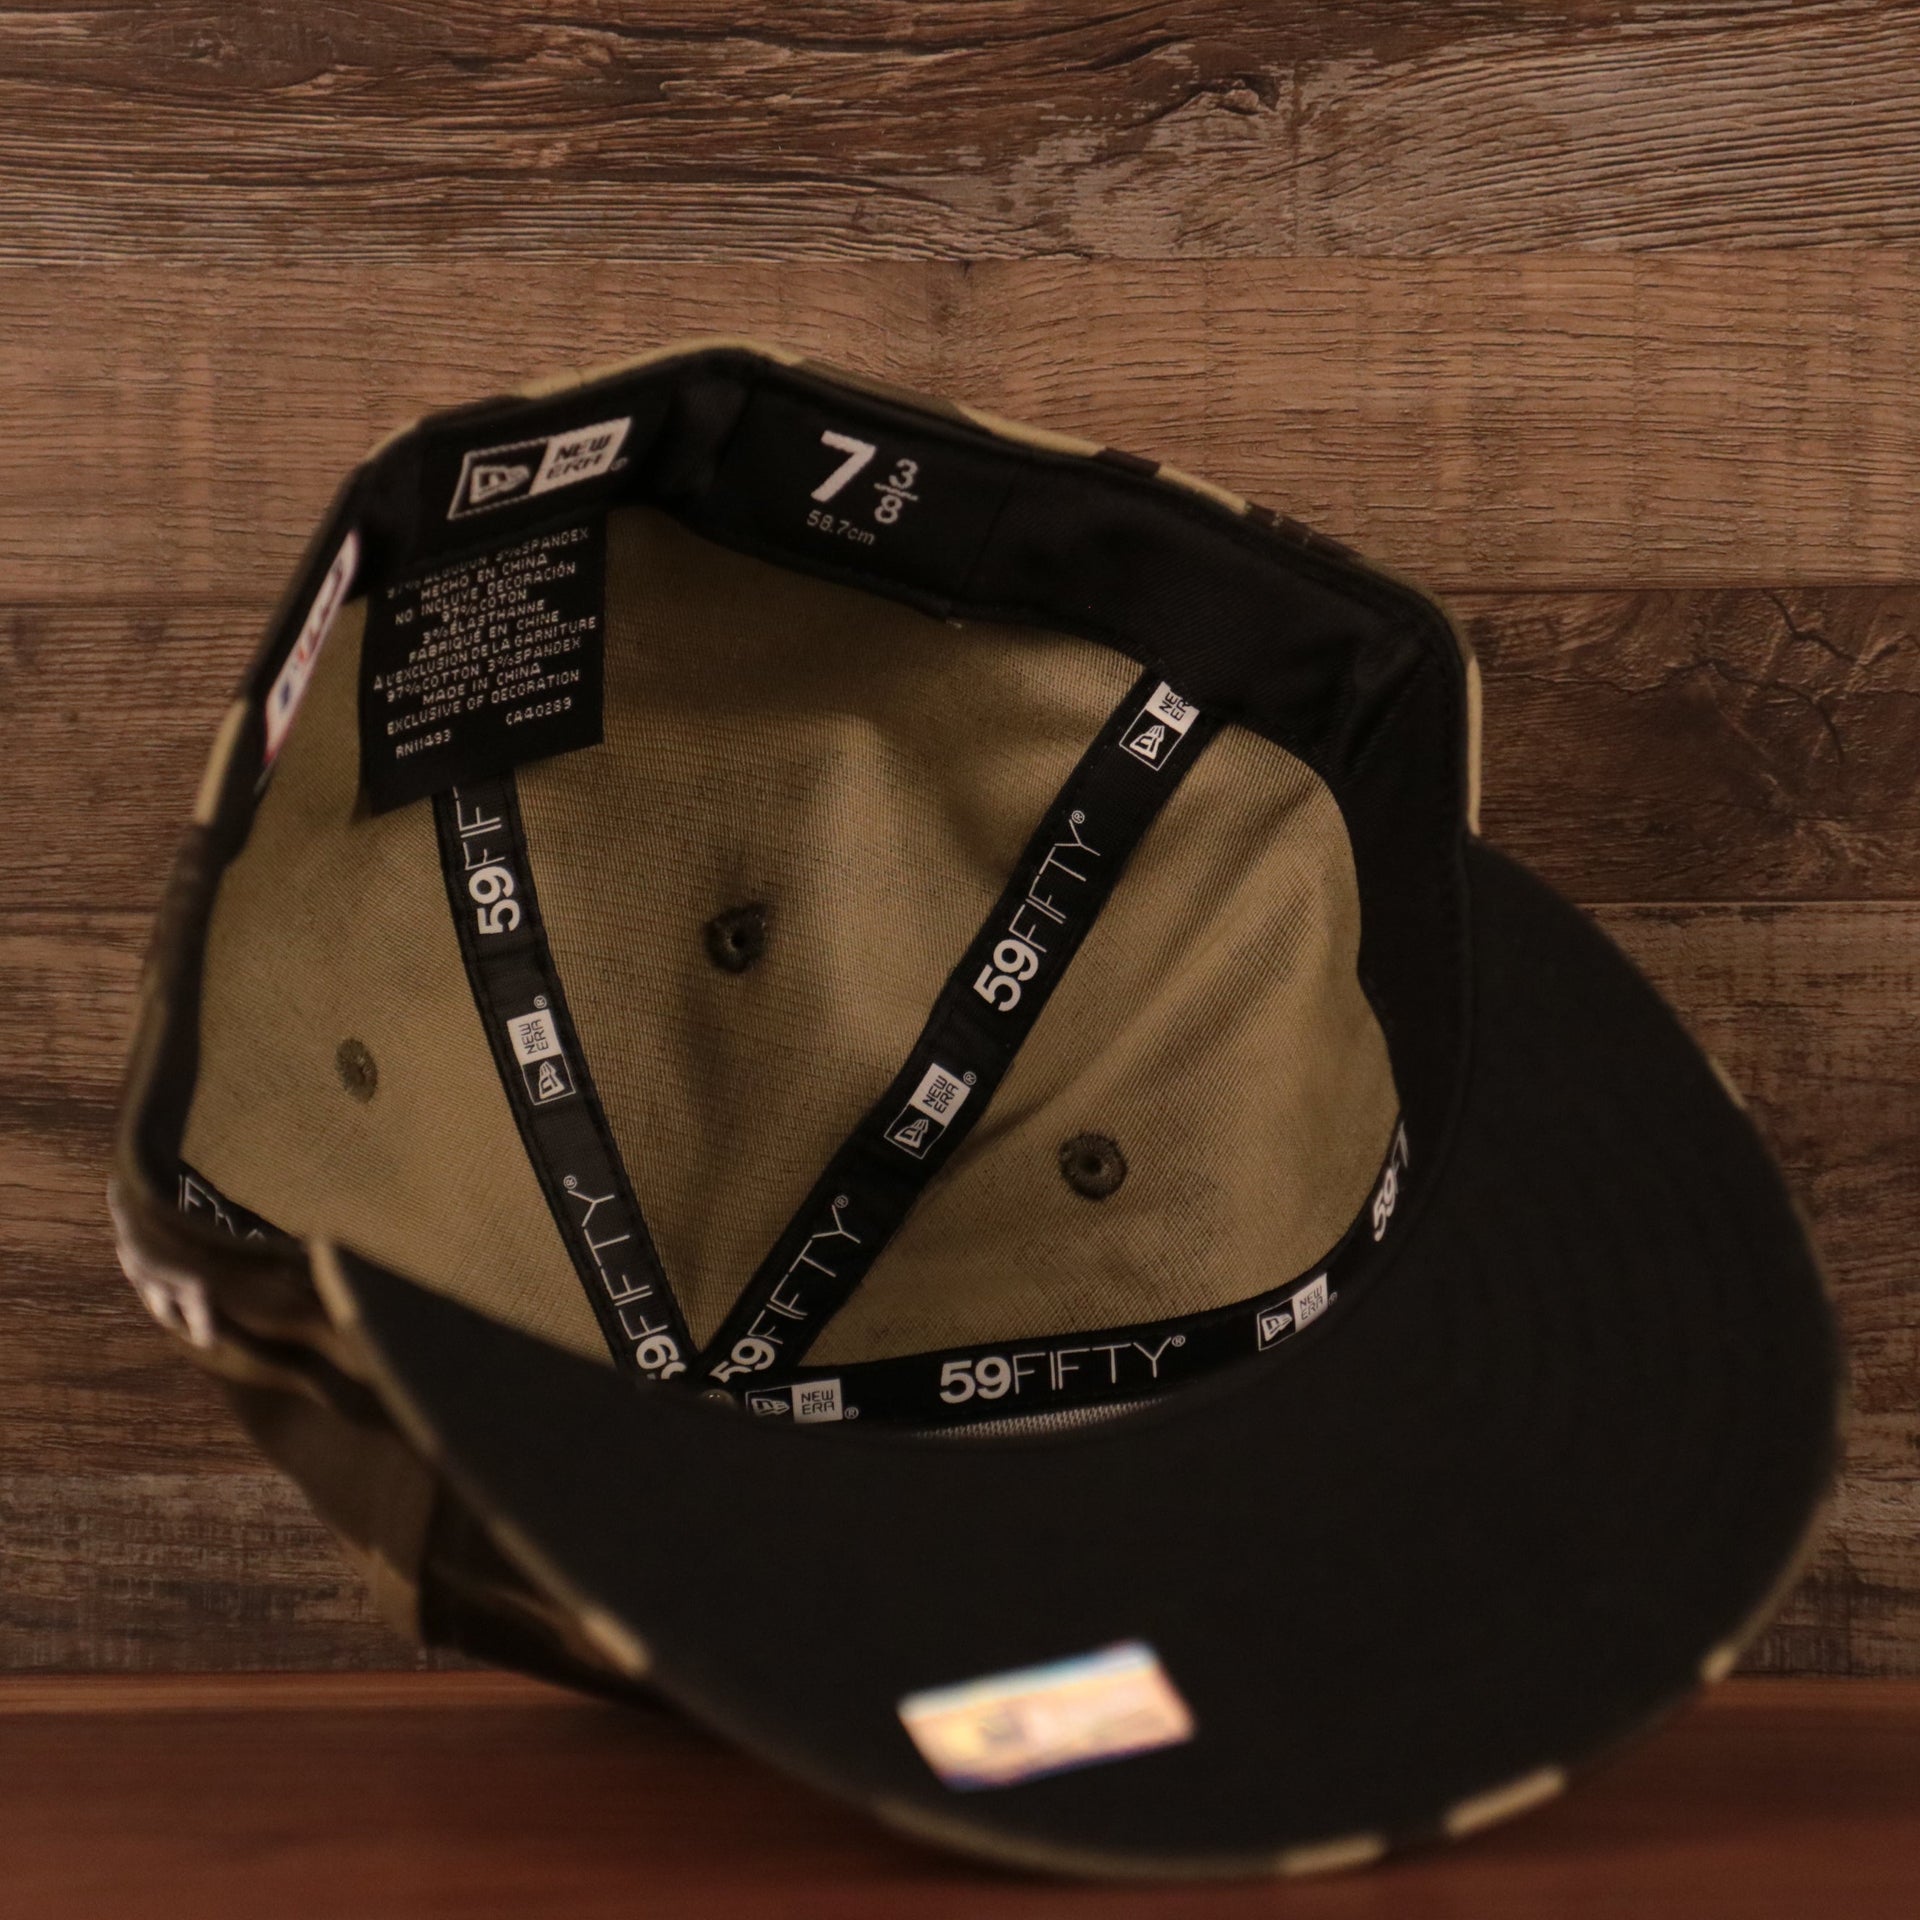 The inside view of the crown of the black bottom fitted 2021 Phillies military hat by New Era.